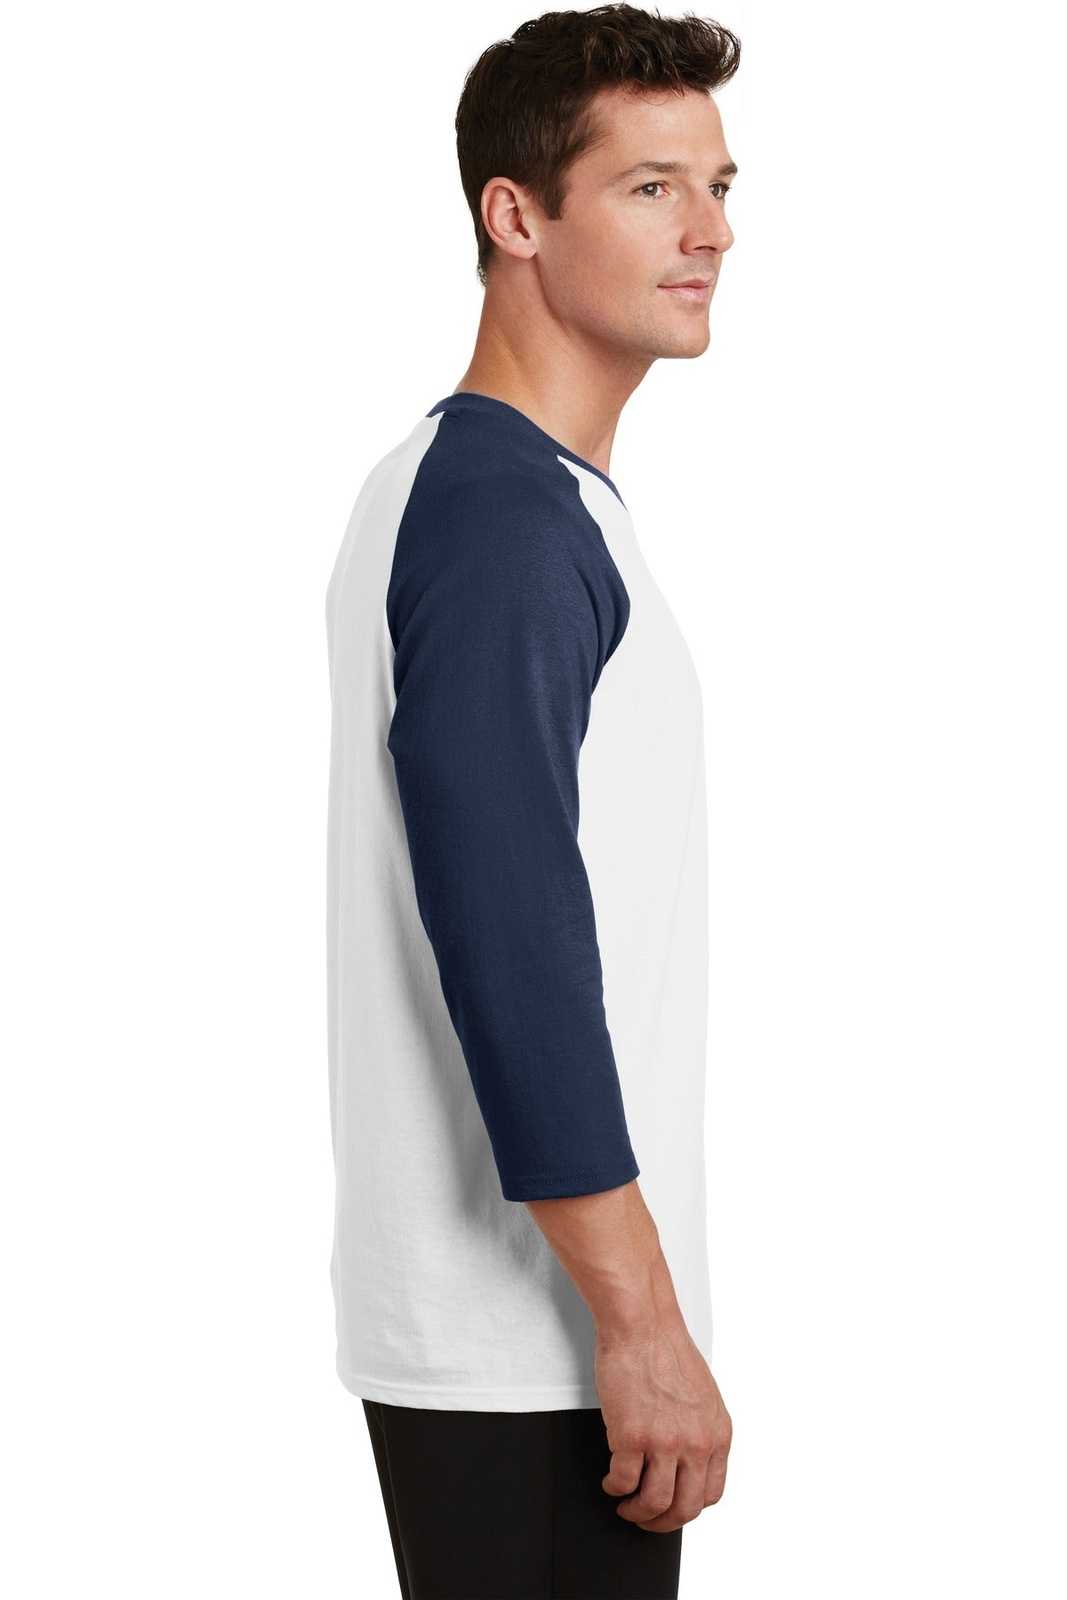 Port &amp; Company PC55RS Core Blend 3/4-Sleeve Raglan Tee - White Navy - HIT a Double - 3